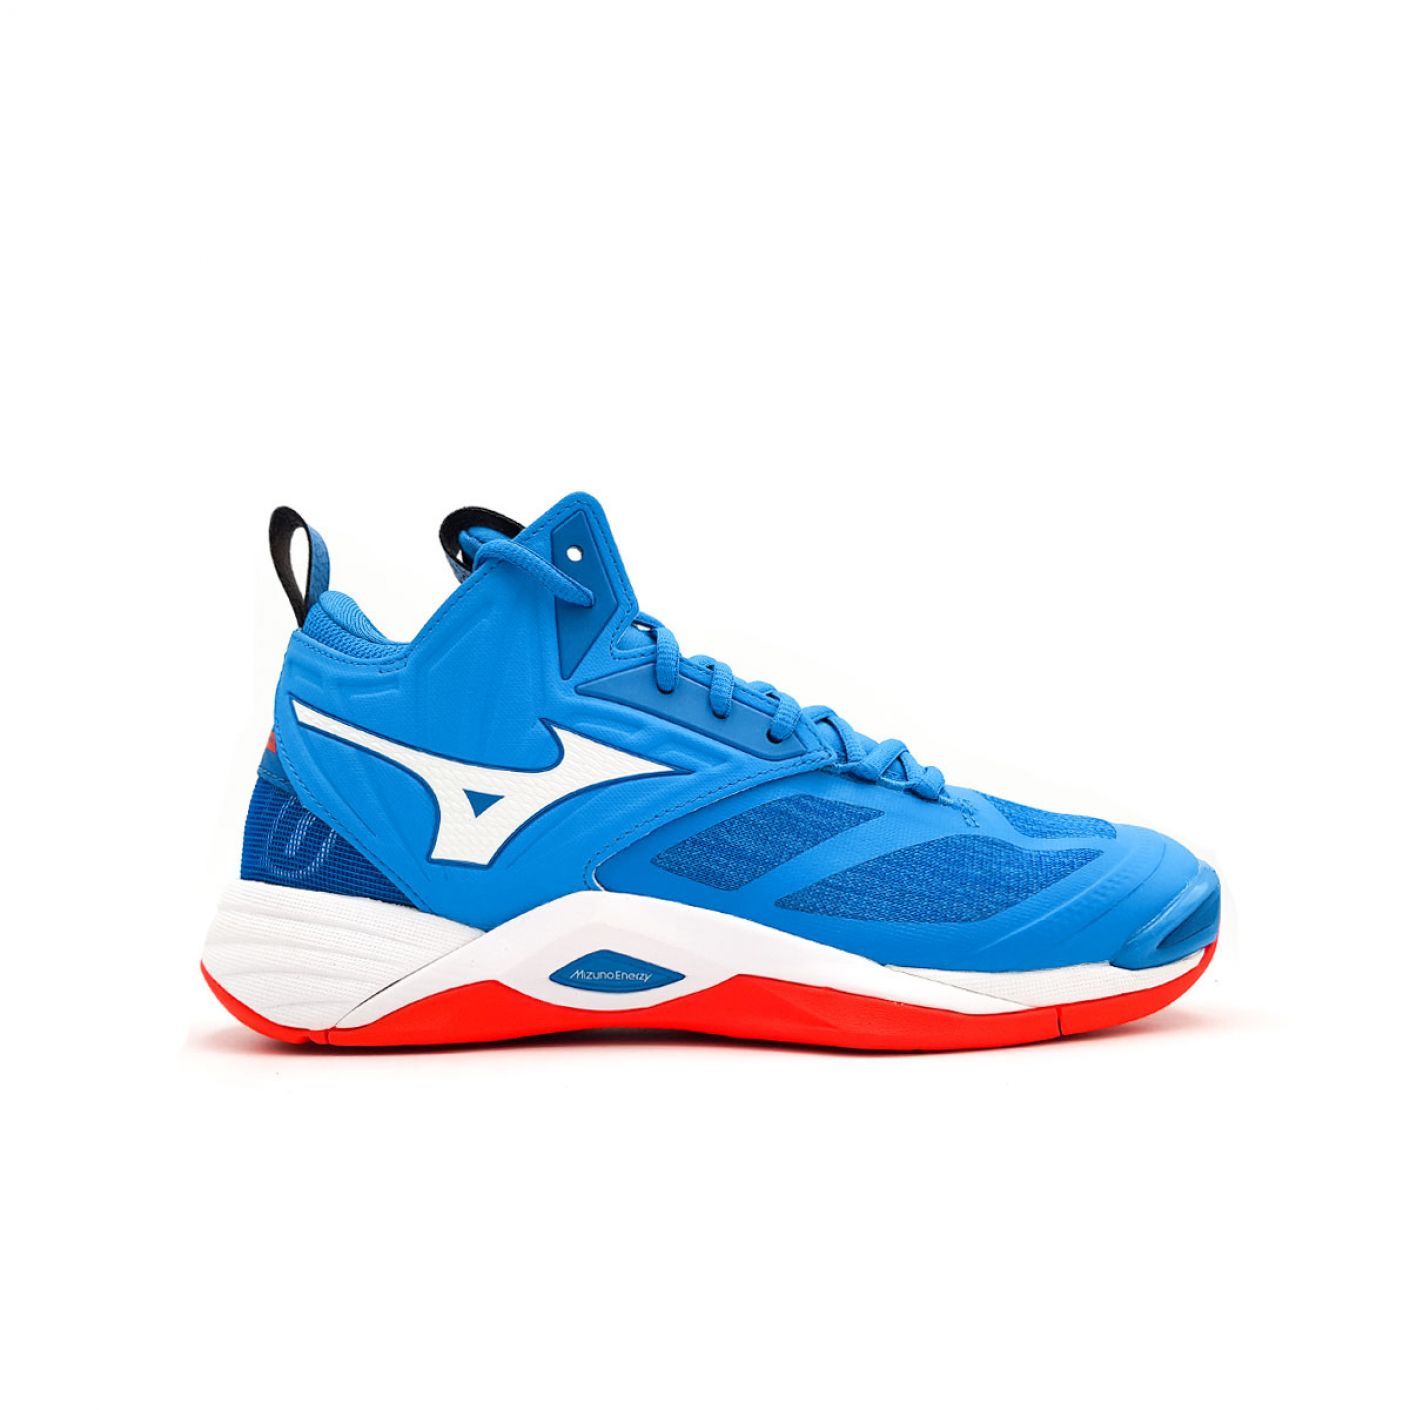 Mizuno Wave Momentum 2 Mid French Blue-White-Red